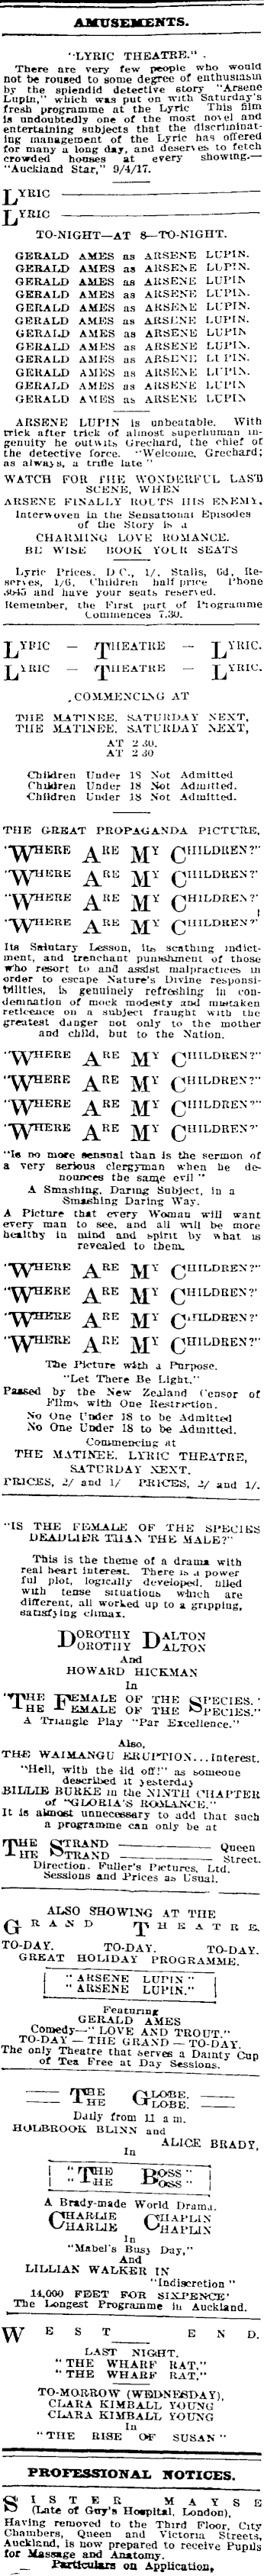 Papers Past Newspapers Auckland Star 10 April 1917 Page 10 Advertisements Column 7